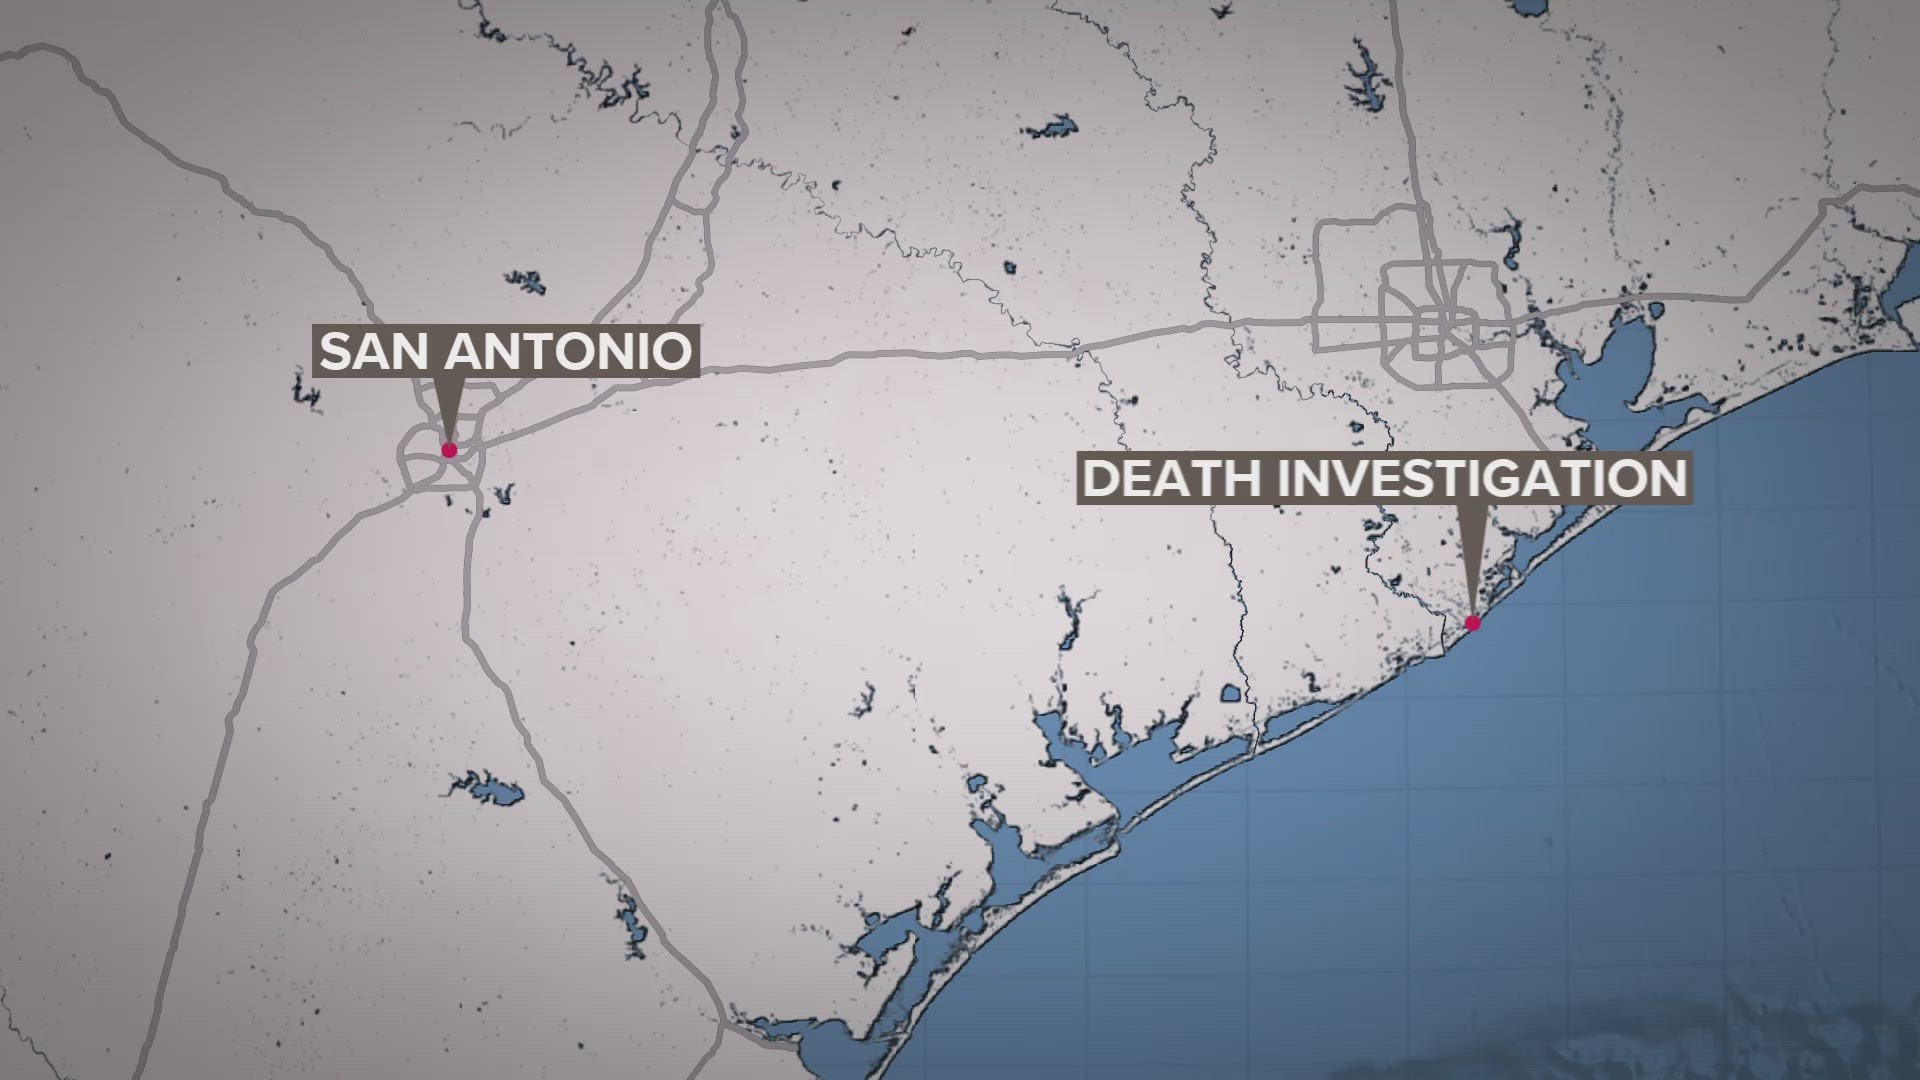 The Brazoria County Sheriff's Office said the woman was 53 years old, and they requested an autopsy to determine what happened.